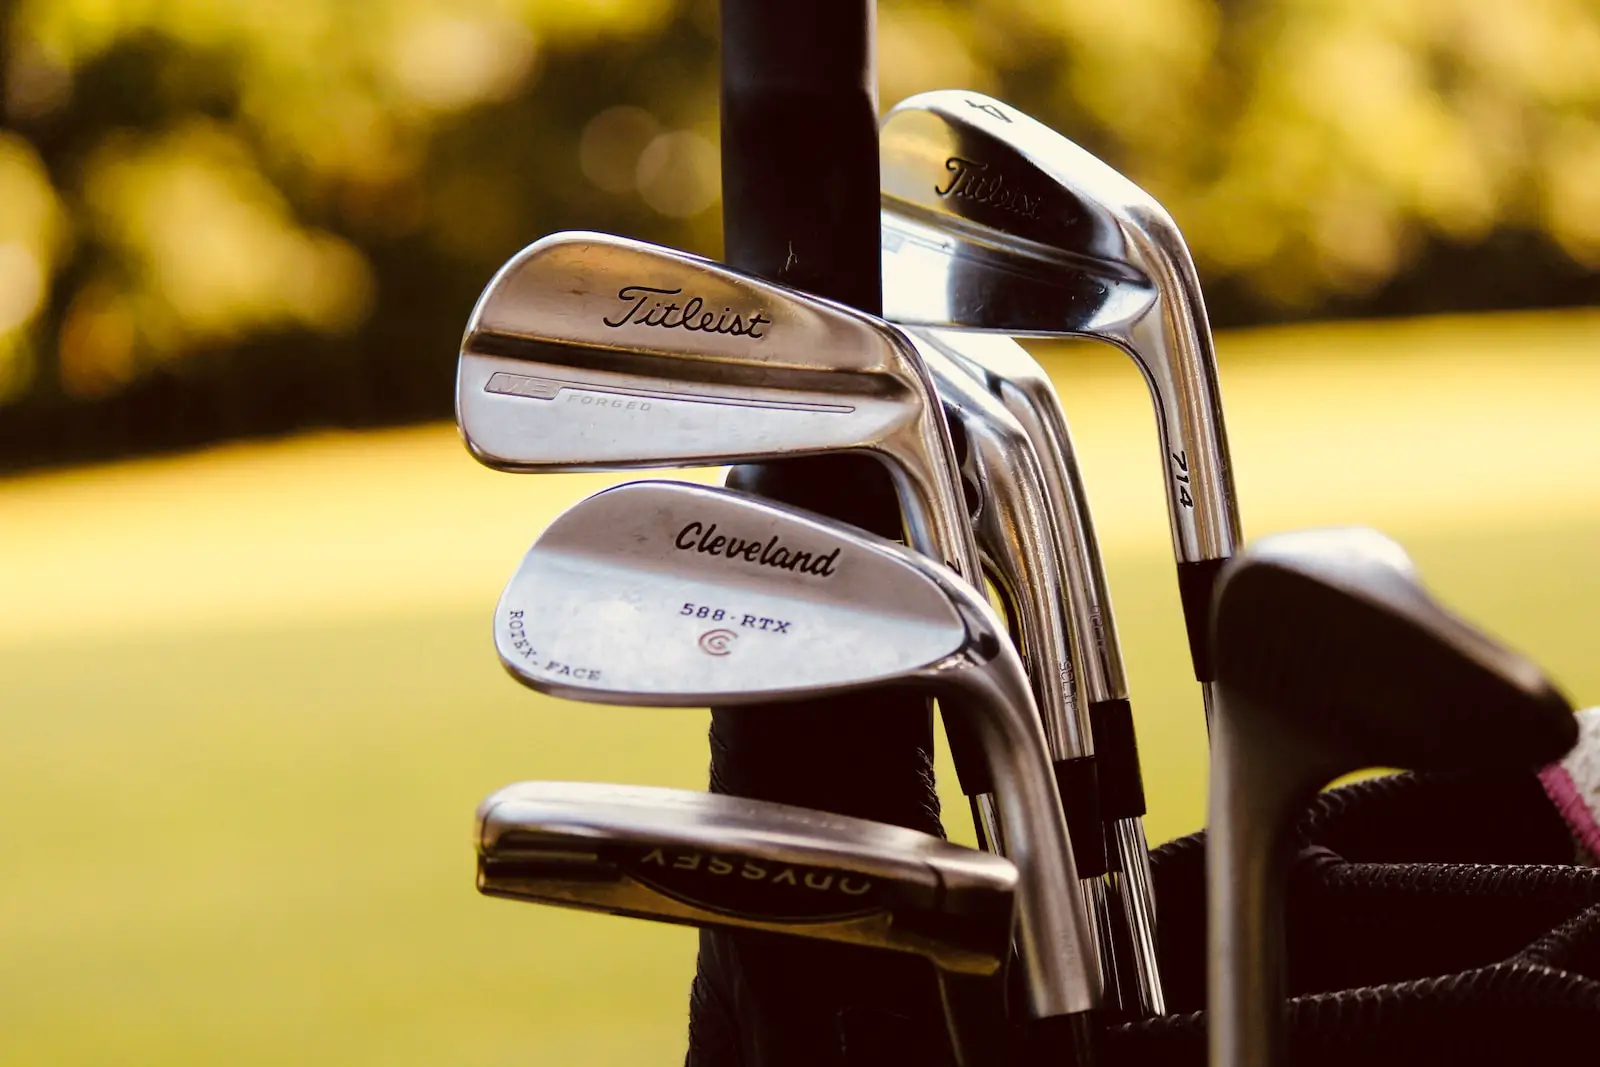 Can you buy used clubs instead of renting